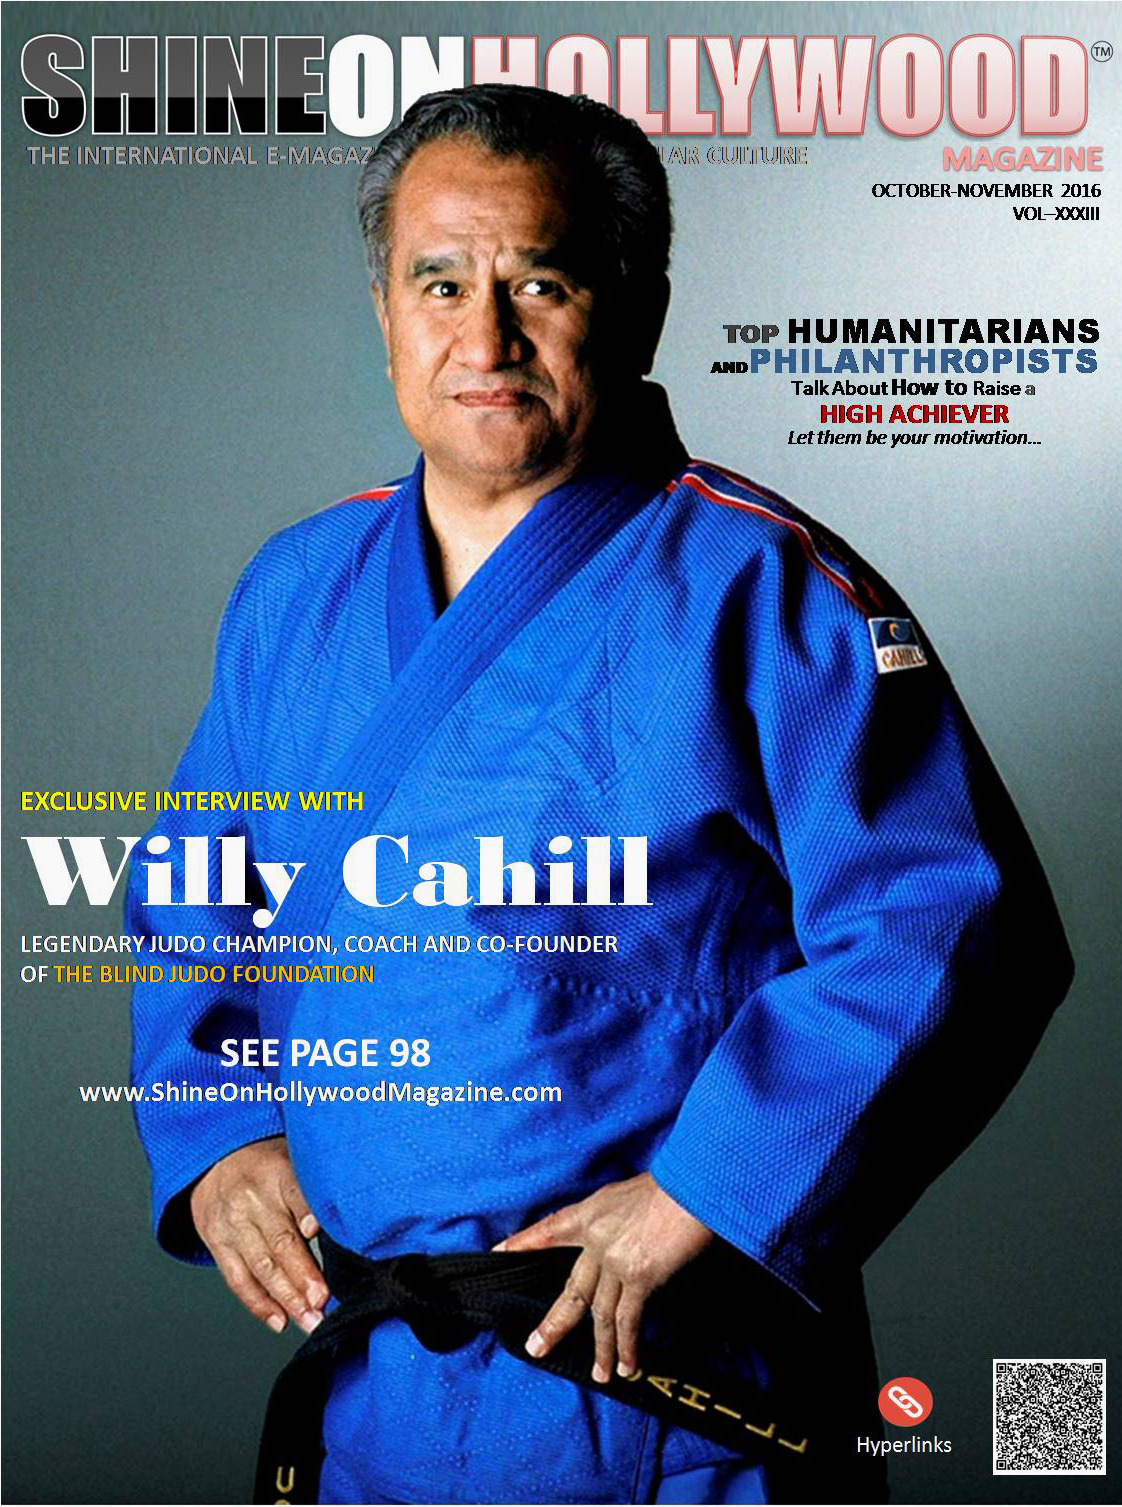 Coach Willy Cahill Co-Founder Blind Judo Foundation; former US Olympic and US Paralympic Judo Coach with Lifetime Achievement Award by USA Judo